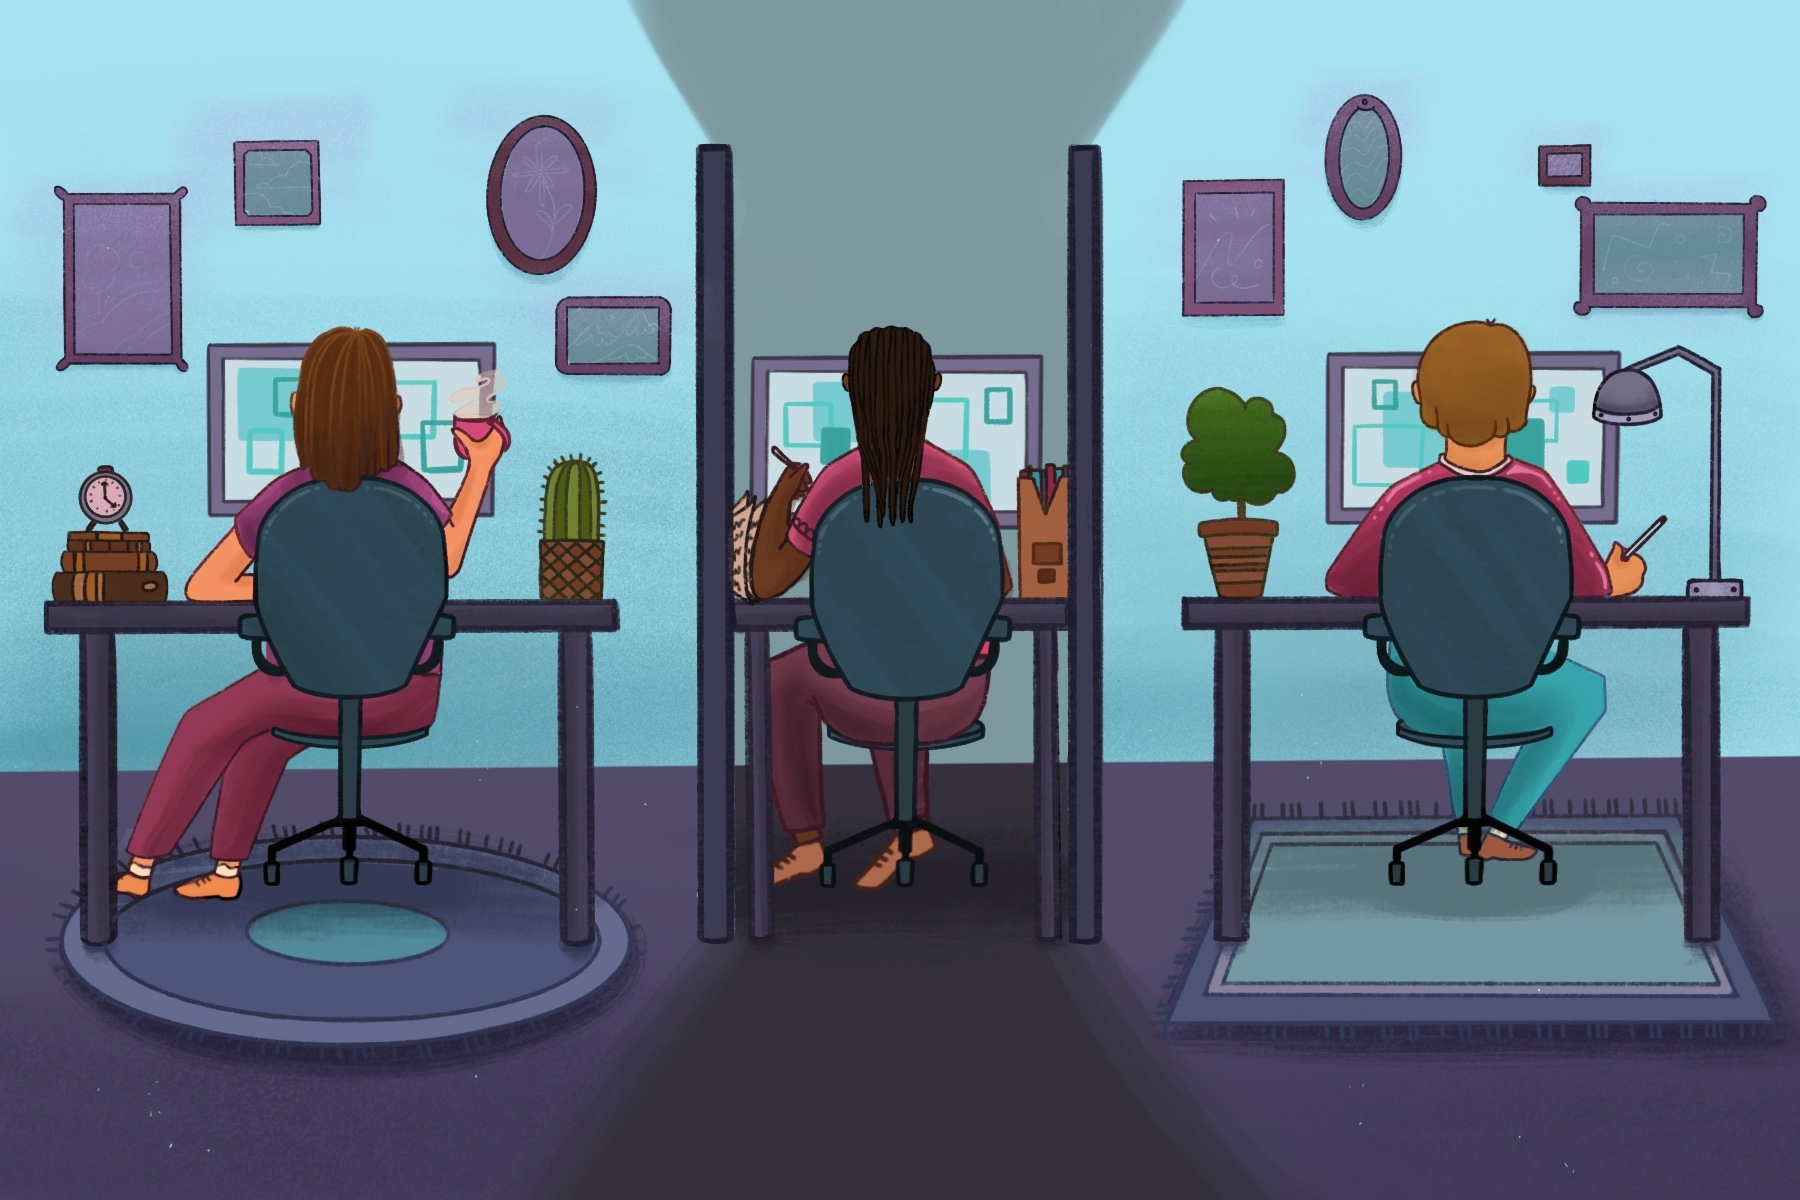 Illustration of three women working in an office. The black woman has a smaller and more dimly lit cubicle.